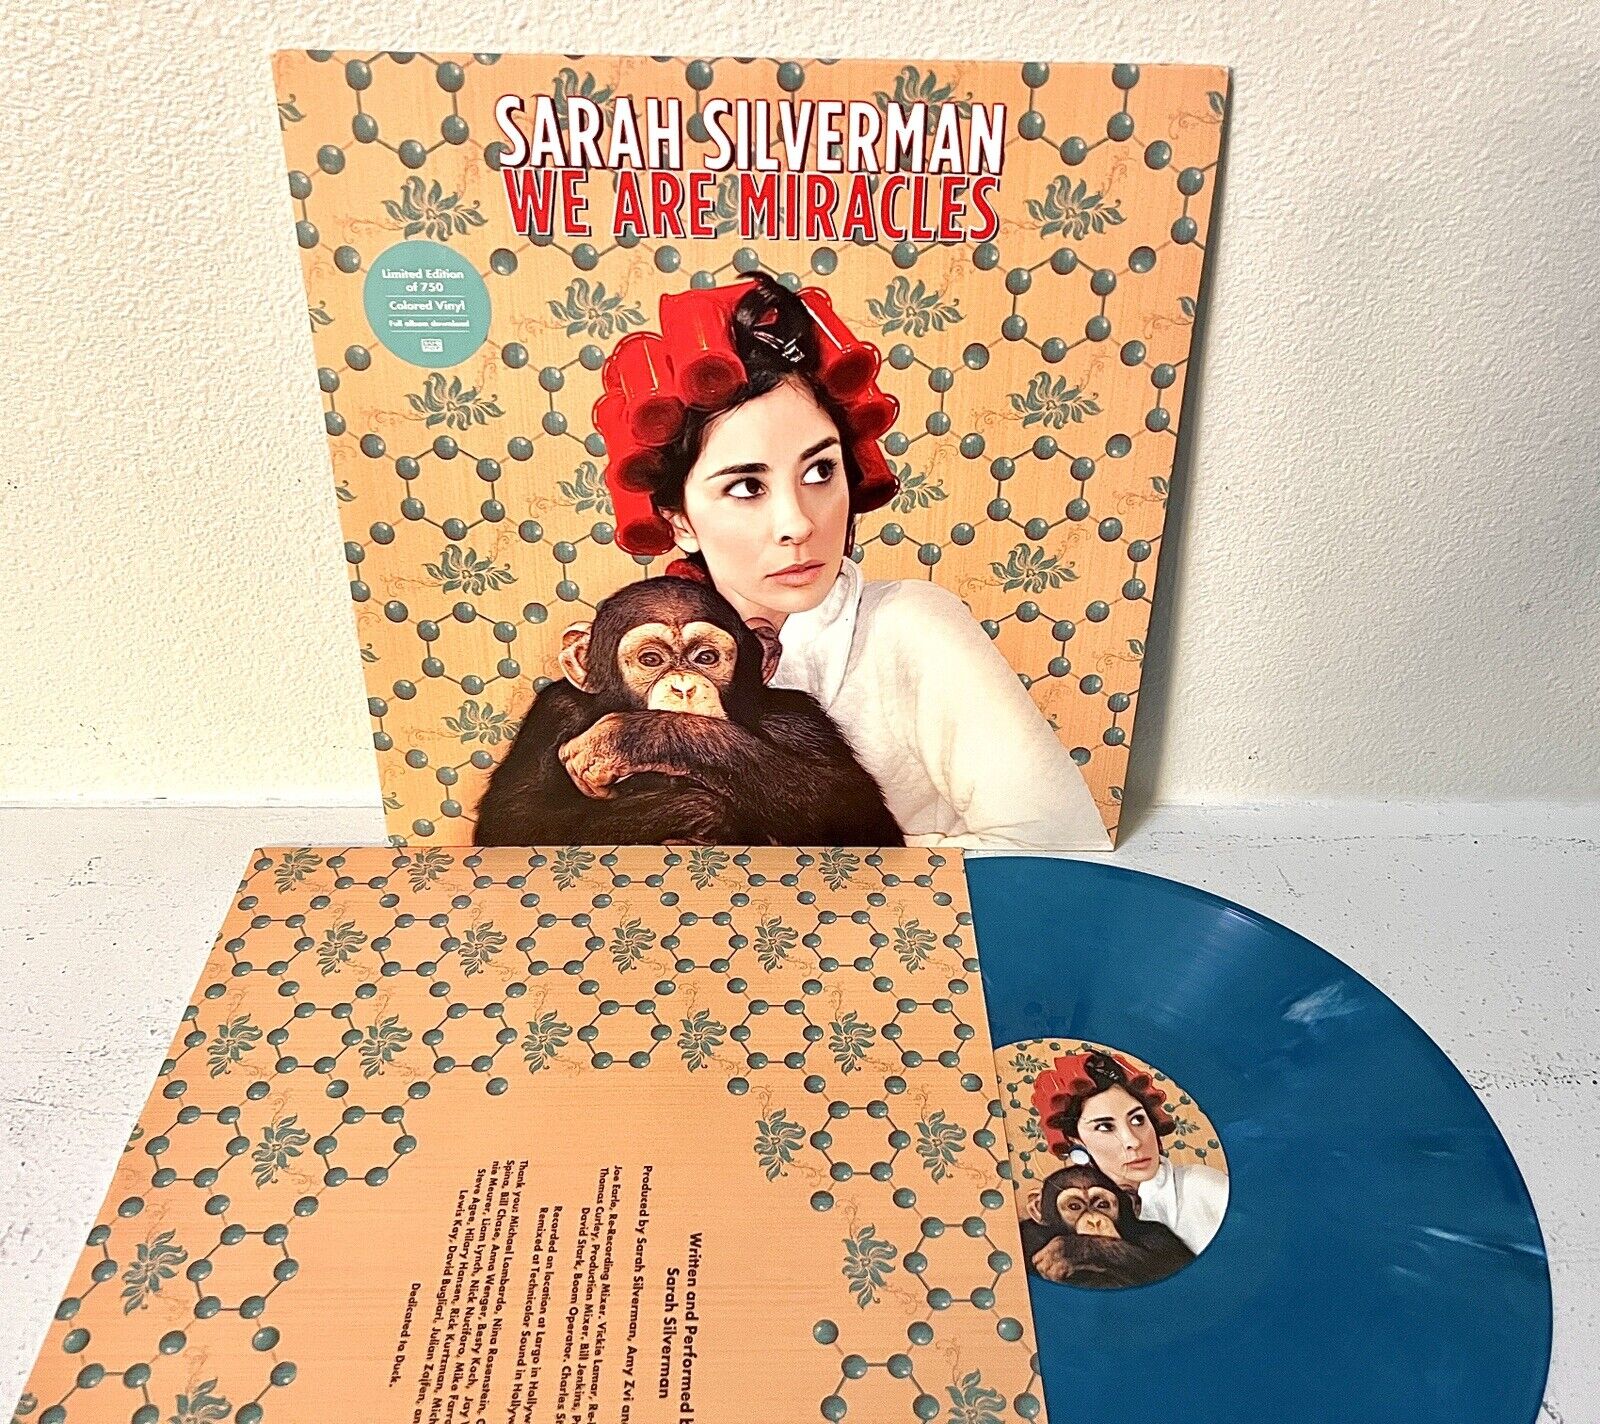 Sarah Silverman We Are Miracles Vinyl LP Limited Teal Blue Marble Vinyl Comedy